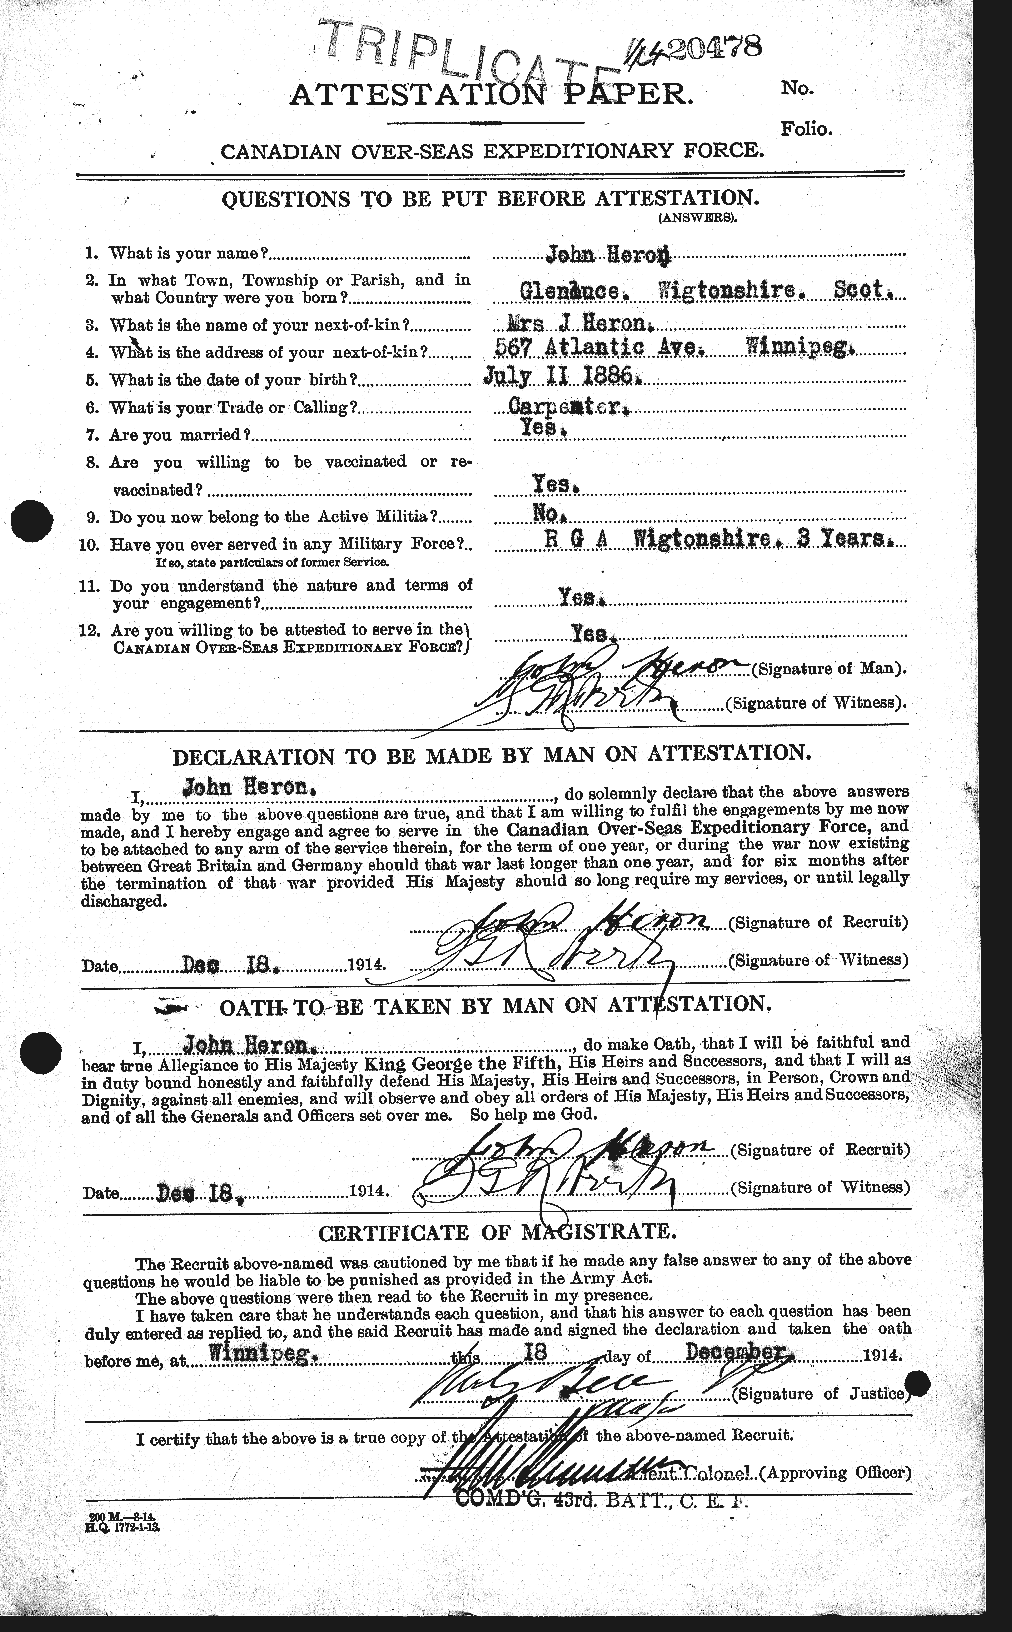 Personnel Records of the First World War - CEF 388474a